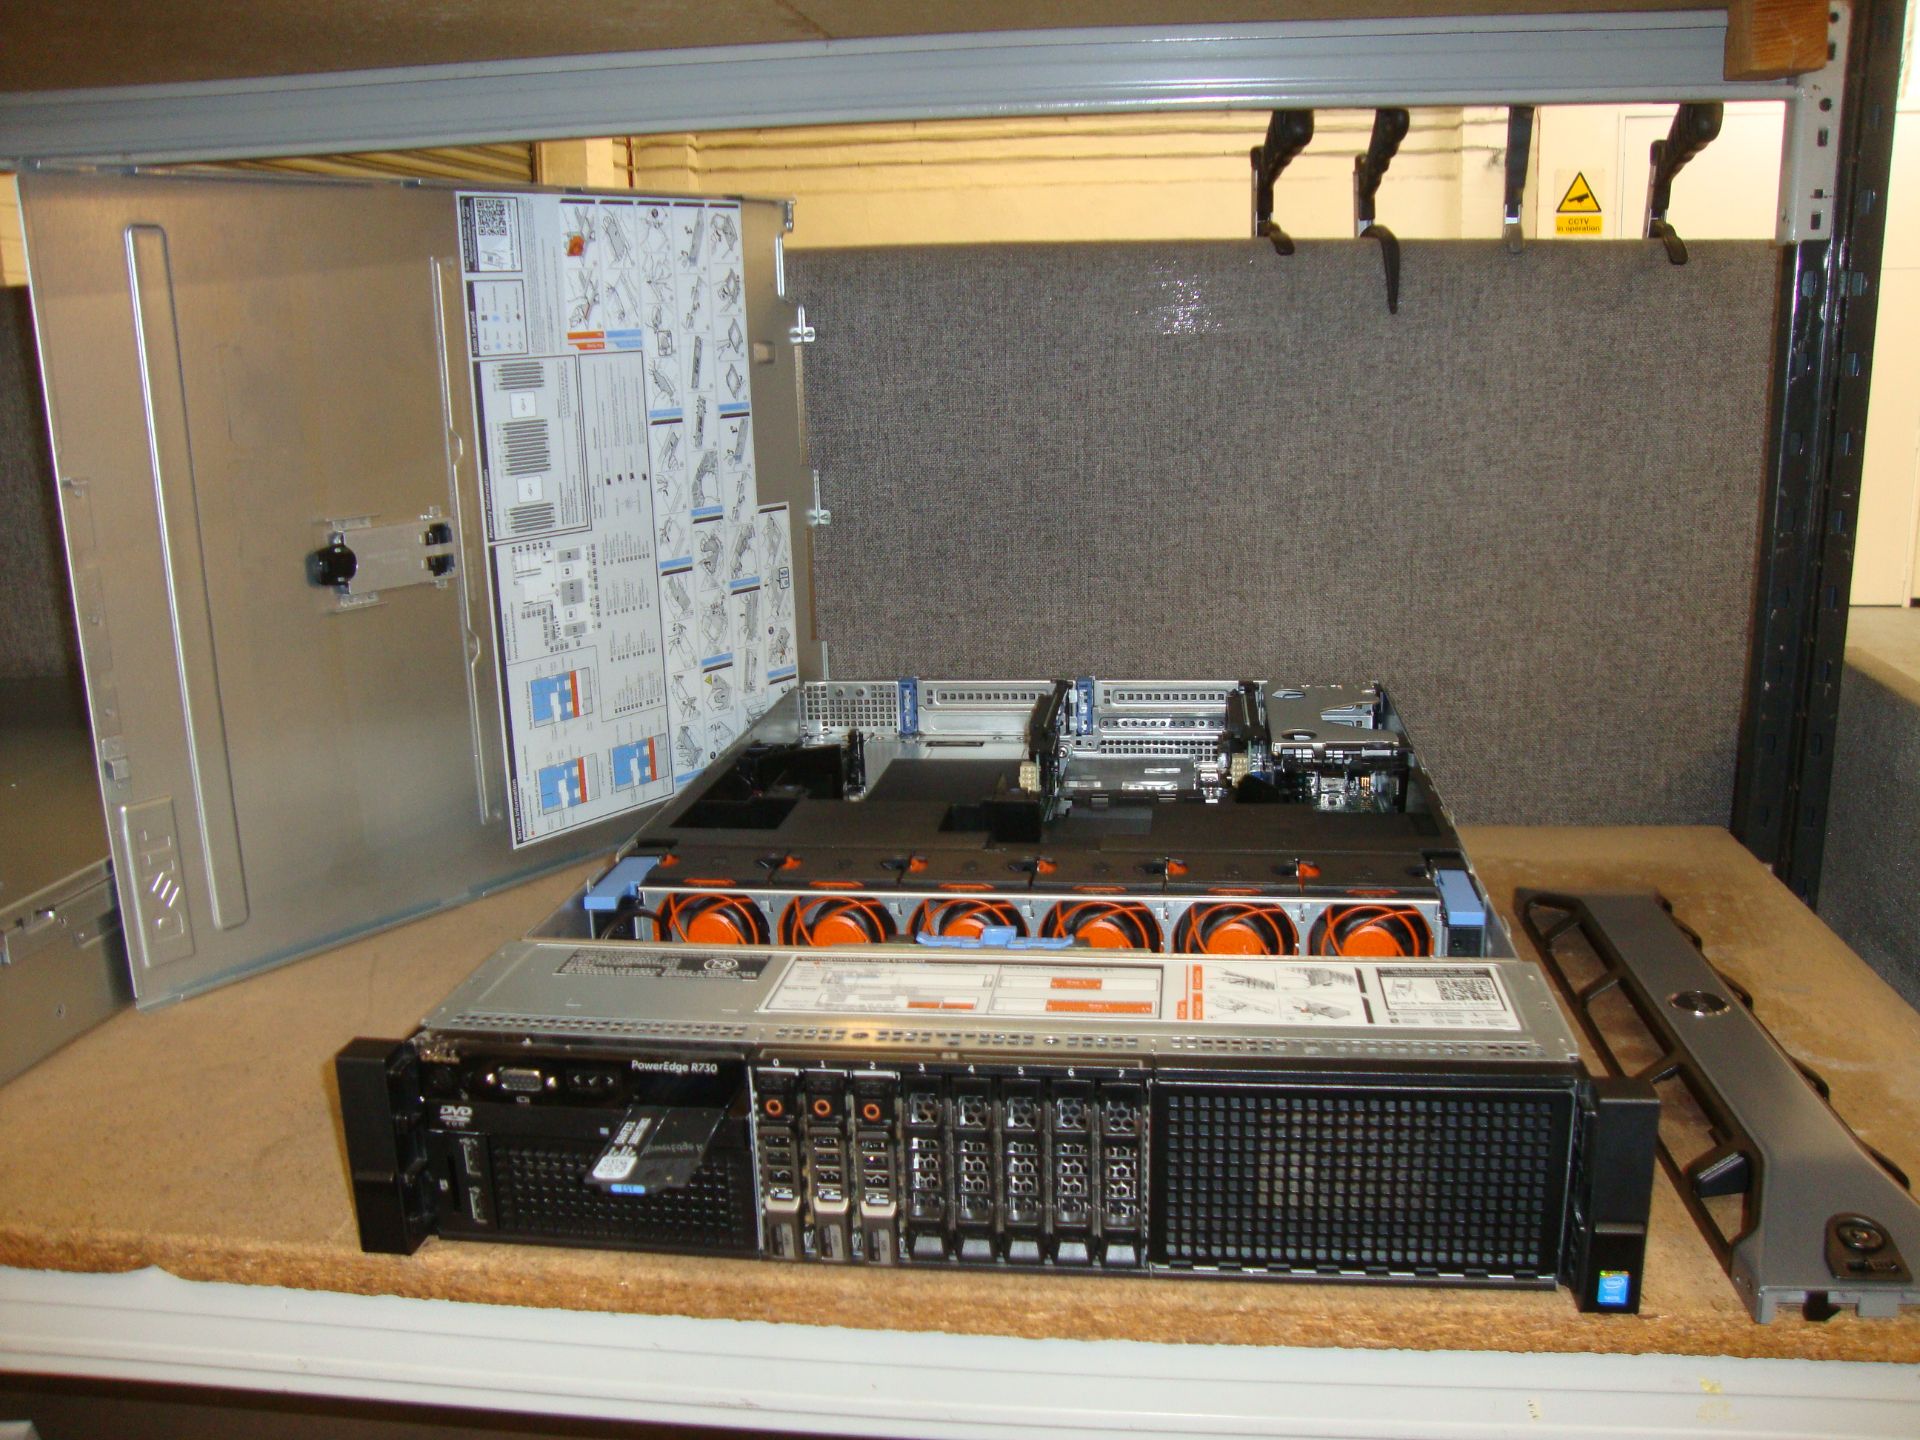 Dell PowerEdge model R730 server with twin Xeon 6 Core E5-2609 V3 1.9 GHz processors, 96Gb RAM, - Image 6 of 13